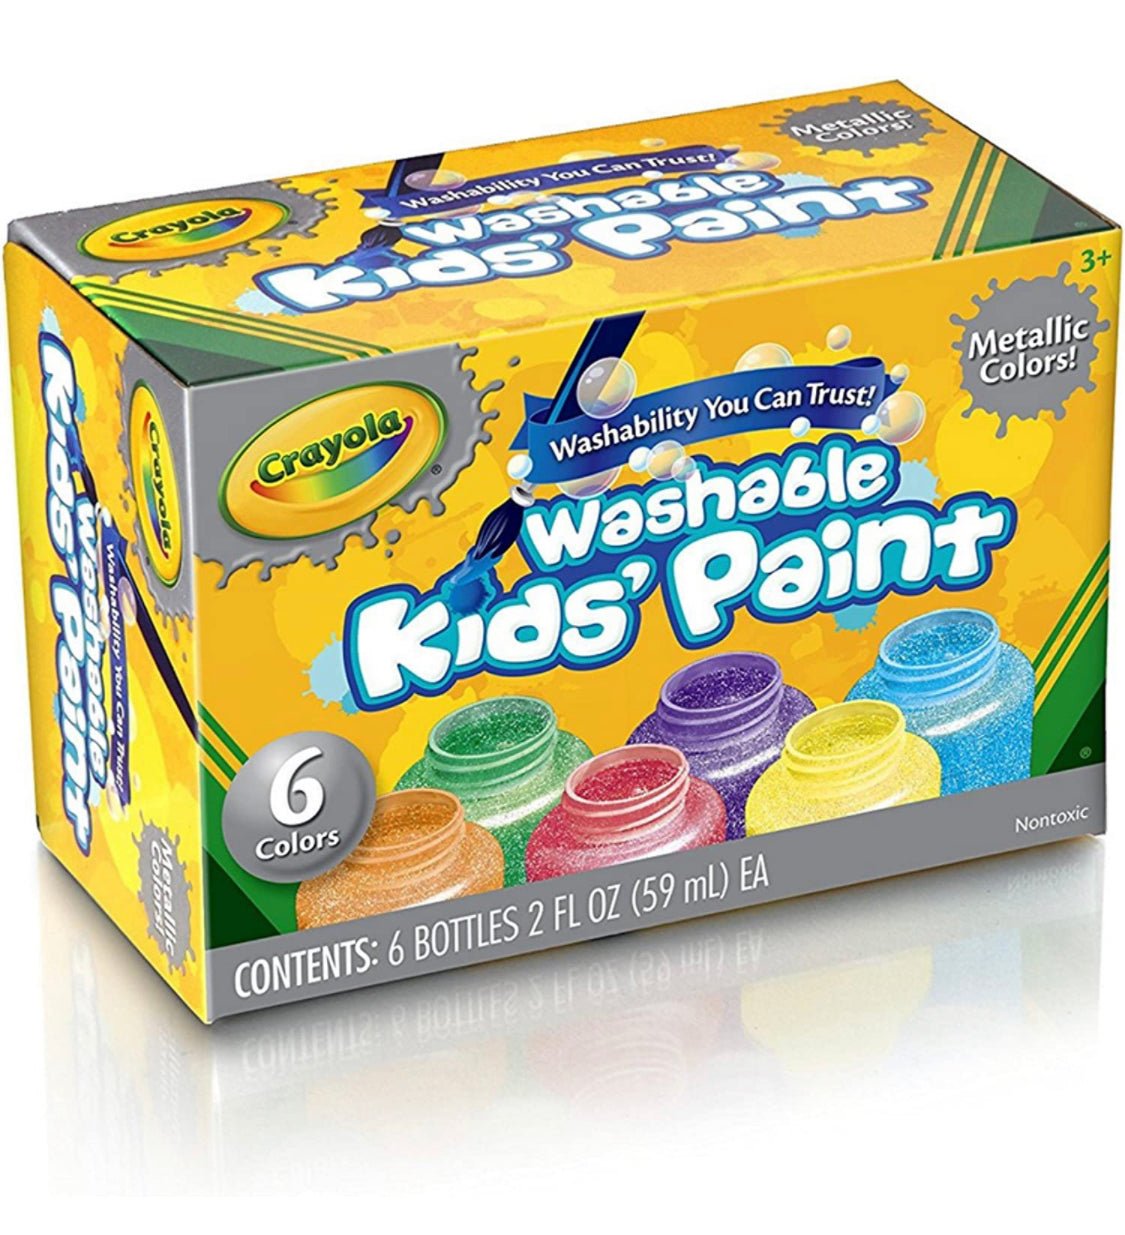 Metallic Crayola Washable Kids Paint, Pack of 6 | Learning and Exploring Through Play